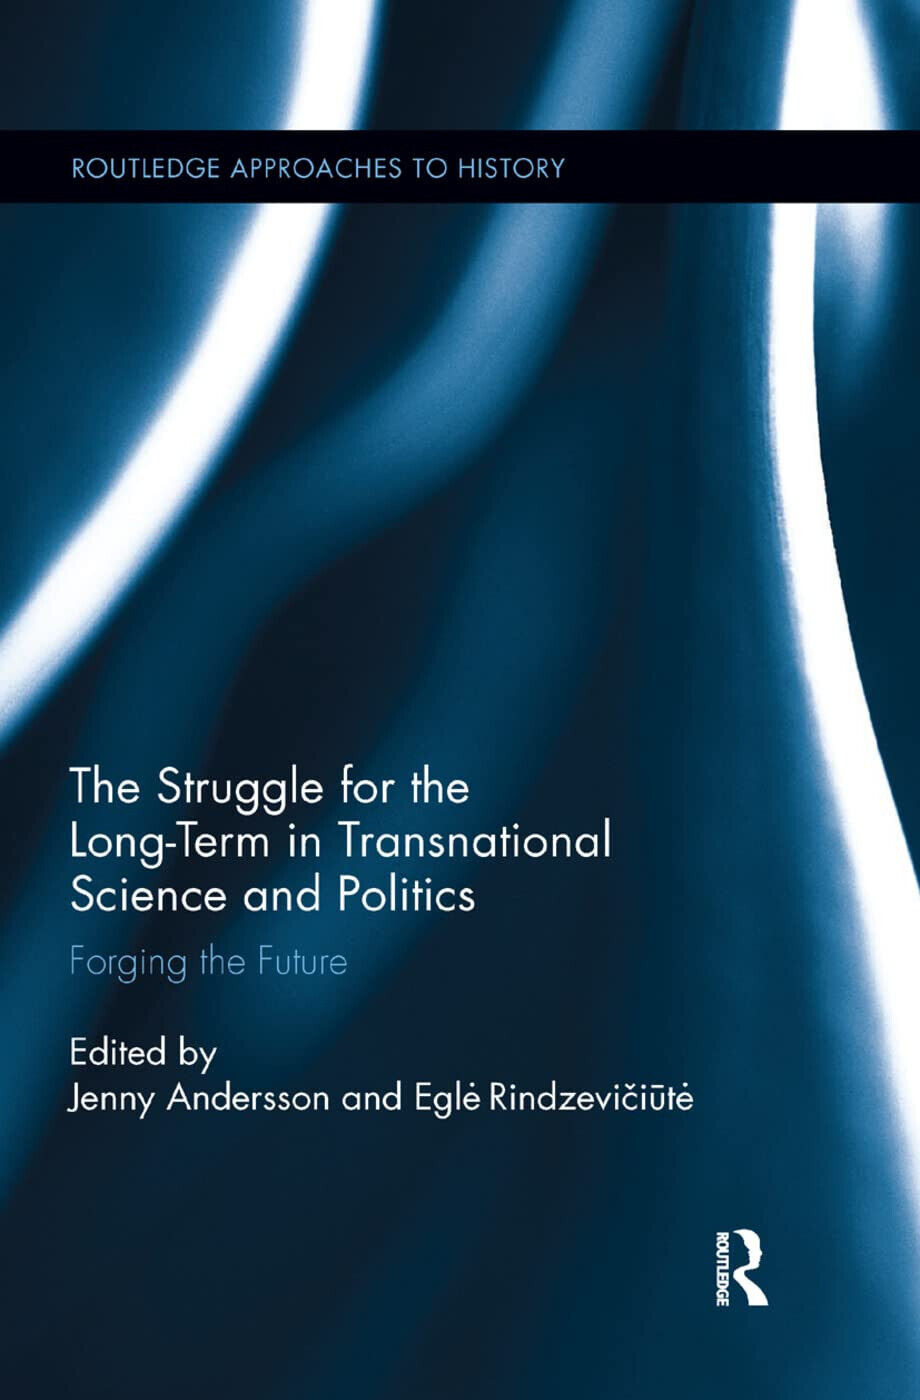 The Struggle for the Long-Term in Transnational Science and Politics - 2019